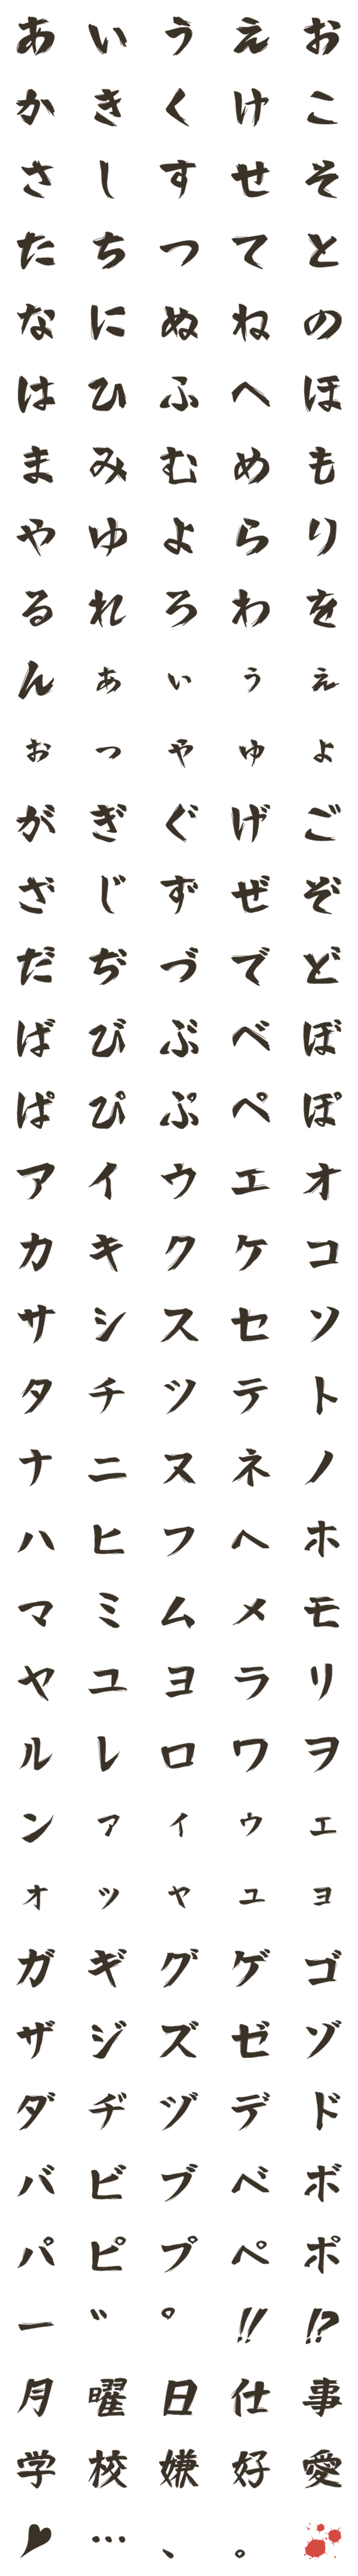 [LINE絵文字]絶叫文字の画像一覧